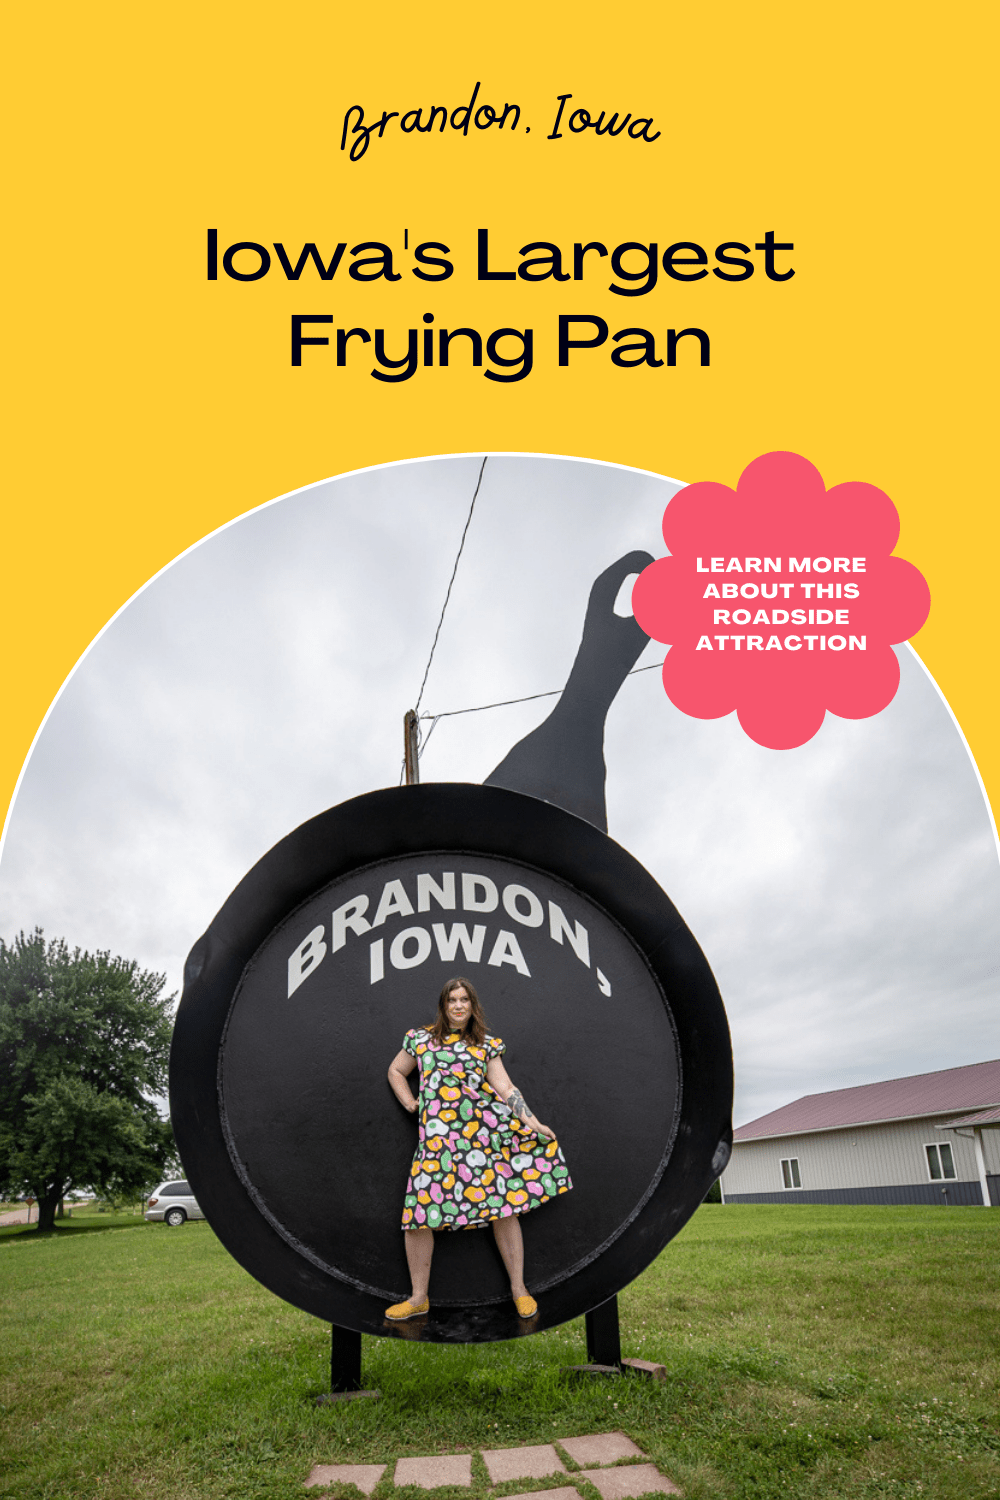 Iowa’s Largest Frying Pan in Brandon, Iowa could cook 528 eggs, 352 pork chops, or 88 pounds of bacon. That’s a lot of bacon! This roadside attraction is a must see stop on an Iowa road trip. Be sure to save room for a Cowboy Breakfast if you travel in September!  #IowaRoadsideAttractions #IowaRoadsideAttraction #RoadsideAttractions #RoadsideAttraction #RoadTrip #IowaRoadTrip #IowaThingsToDo #IowaRoadTripBucketLists #IowaBucketList #IowaRoadTripIdeas #IowaTravel